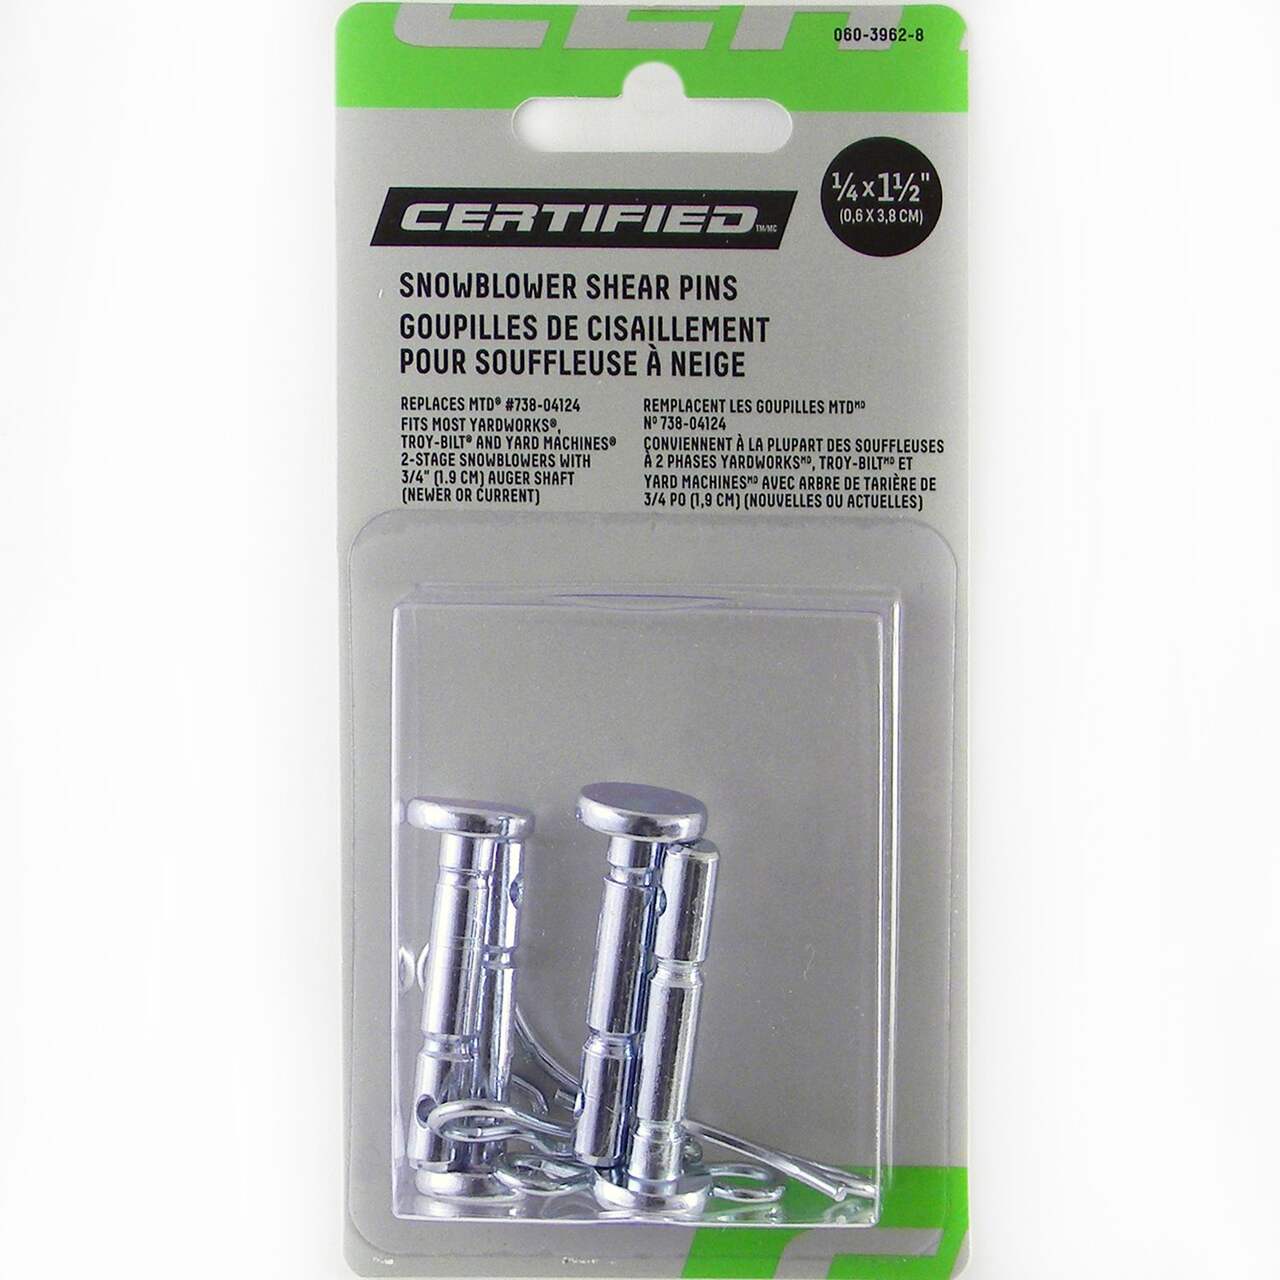 Certified Replacement Shear Pins, Incl. Cotter Pins, 1/4 x 1.5-in, 4-pk